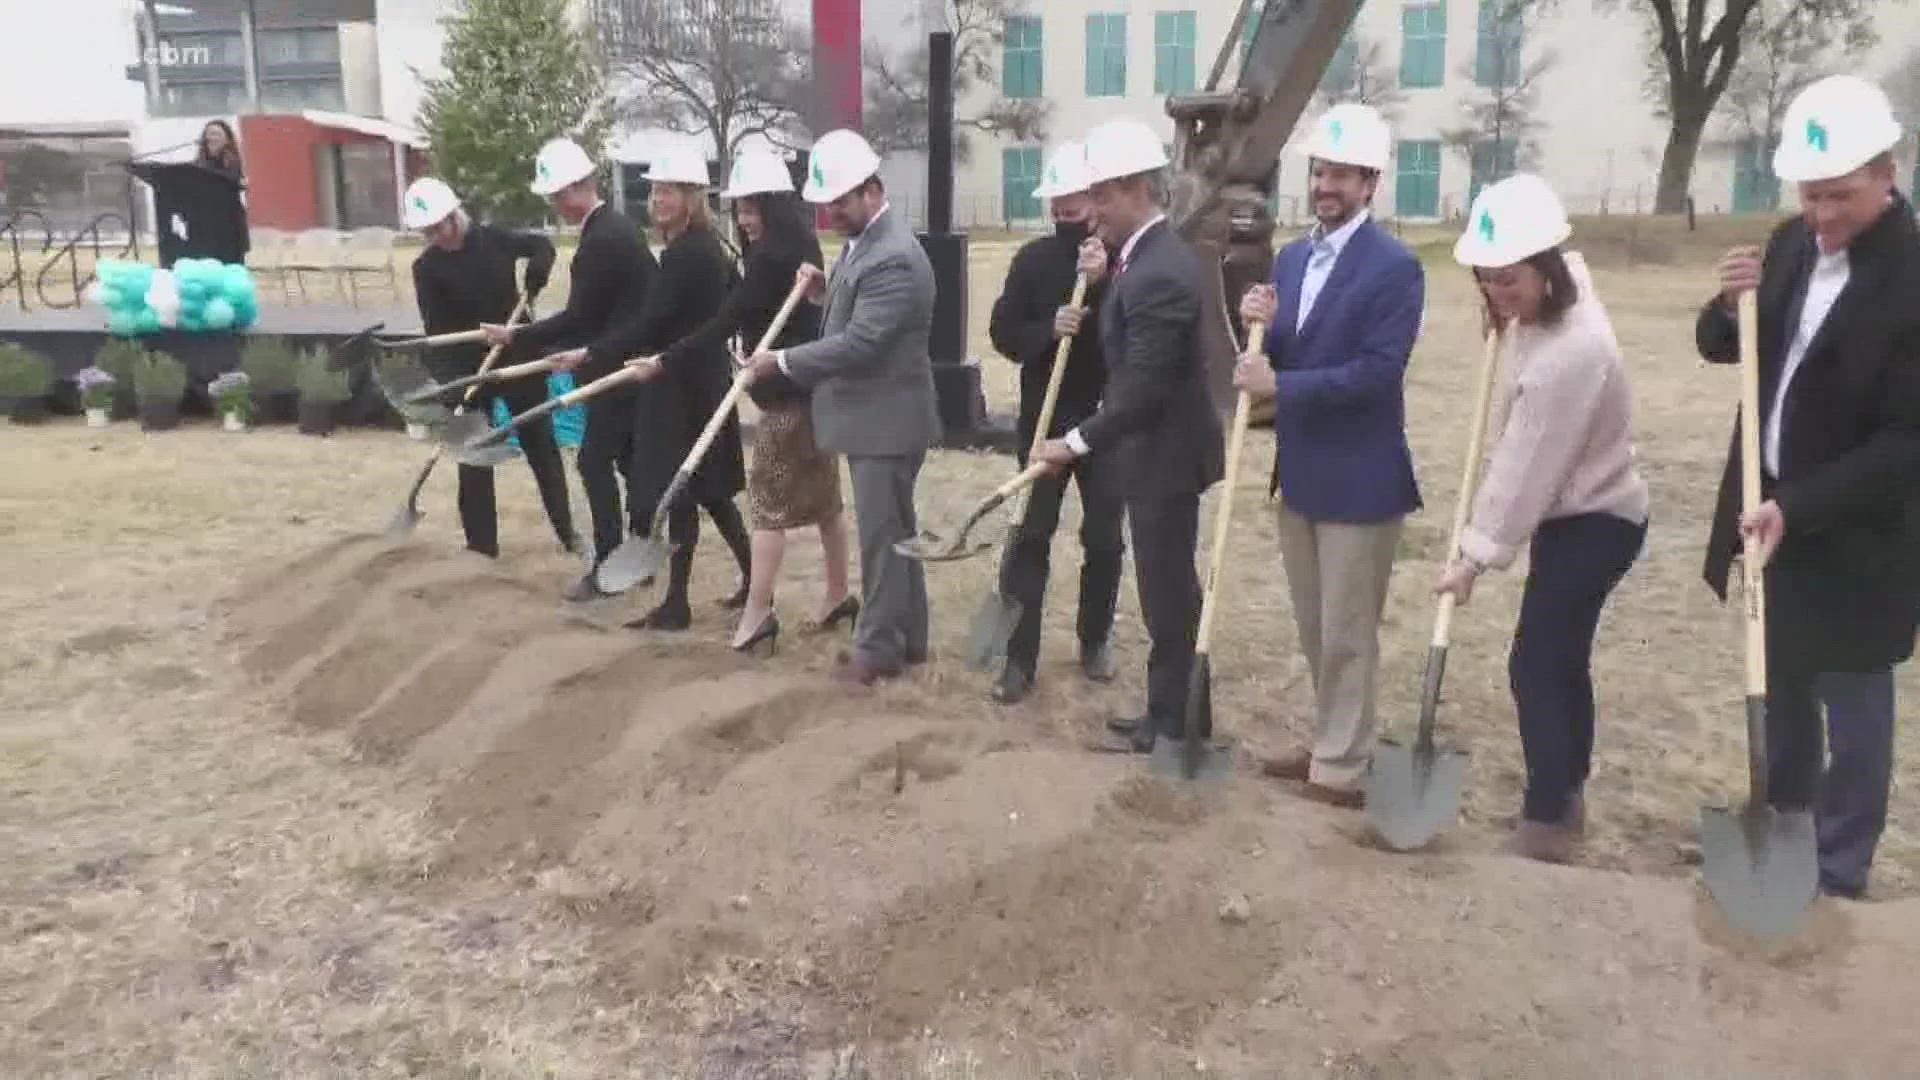 At a formal groundbreaking ceremony, city officials shared how 5,000 acres of the northwest corner of South Alamo Street and East Market Street will be transformed.